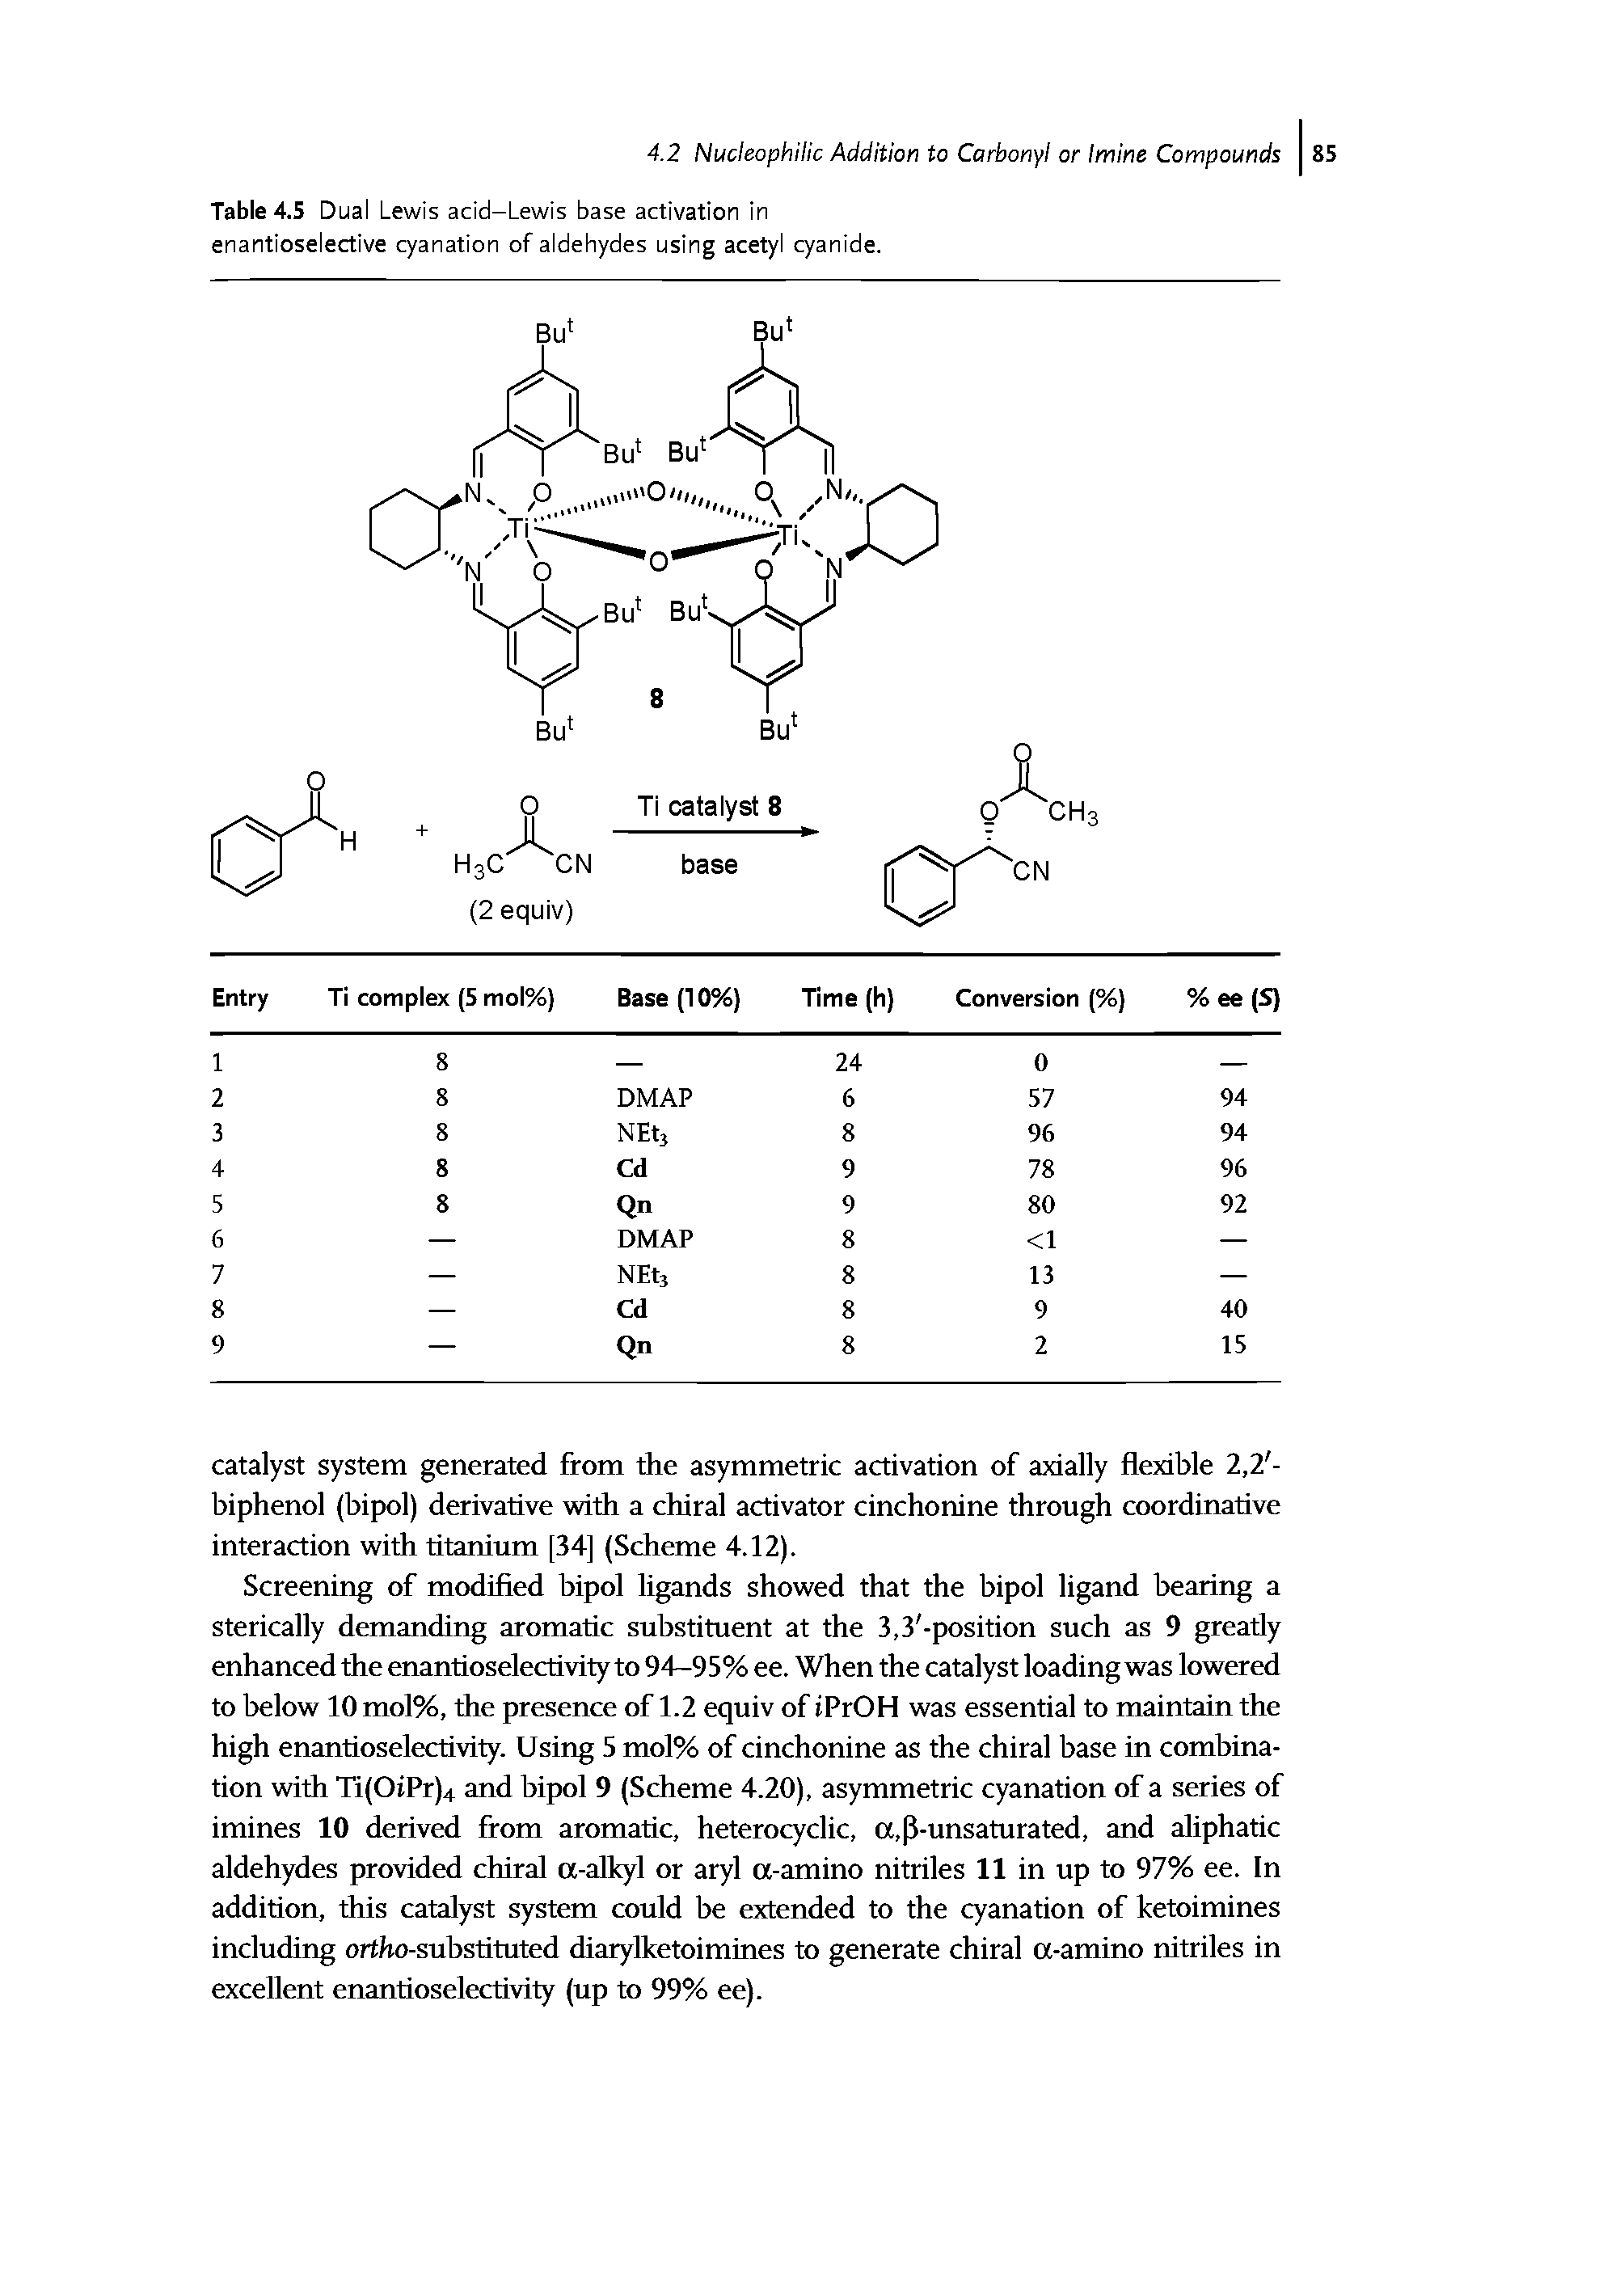 Table 4.5 Dual Lewis acid-Lewis base activation in enantioselective cyanation of aldehydes using acetyl cyanide.